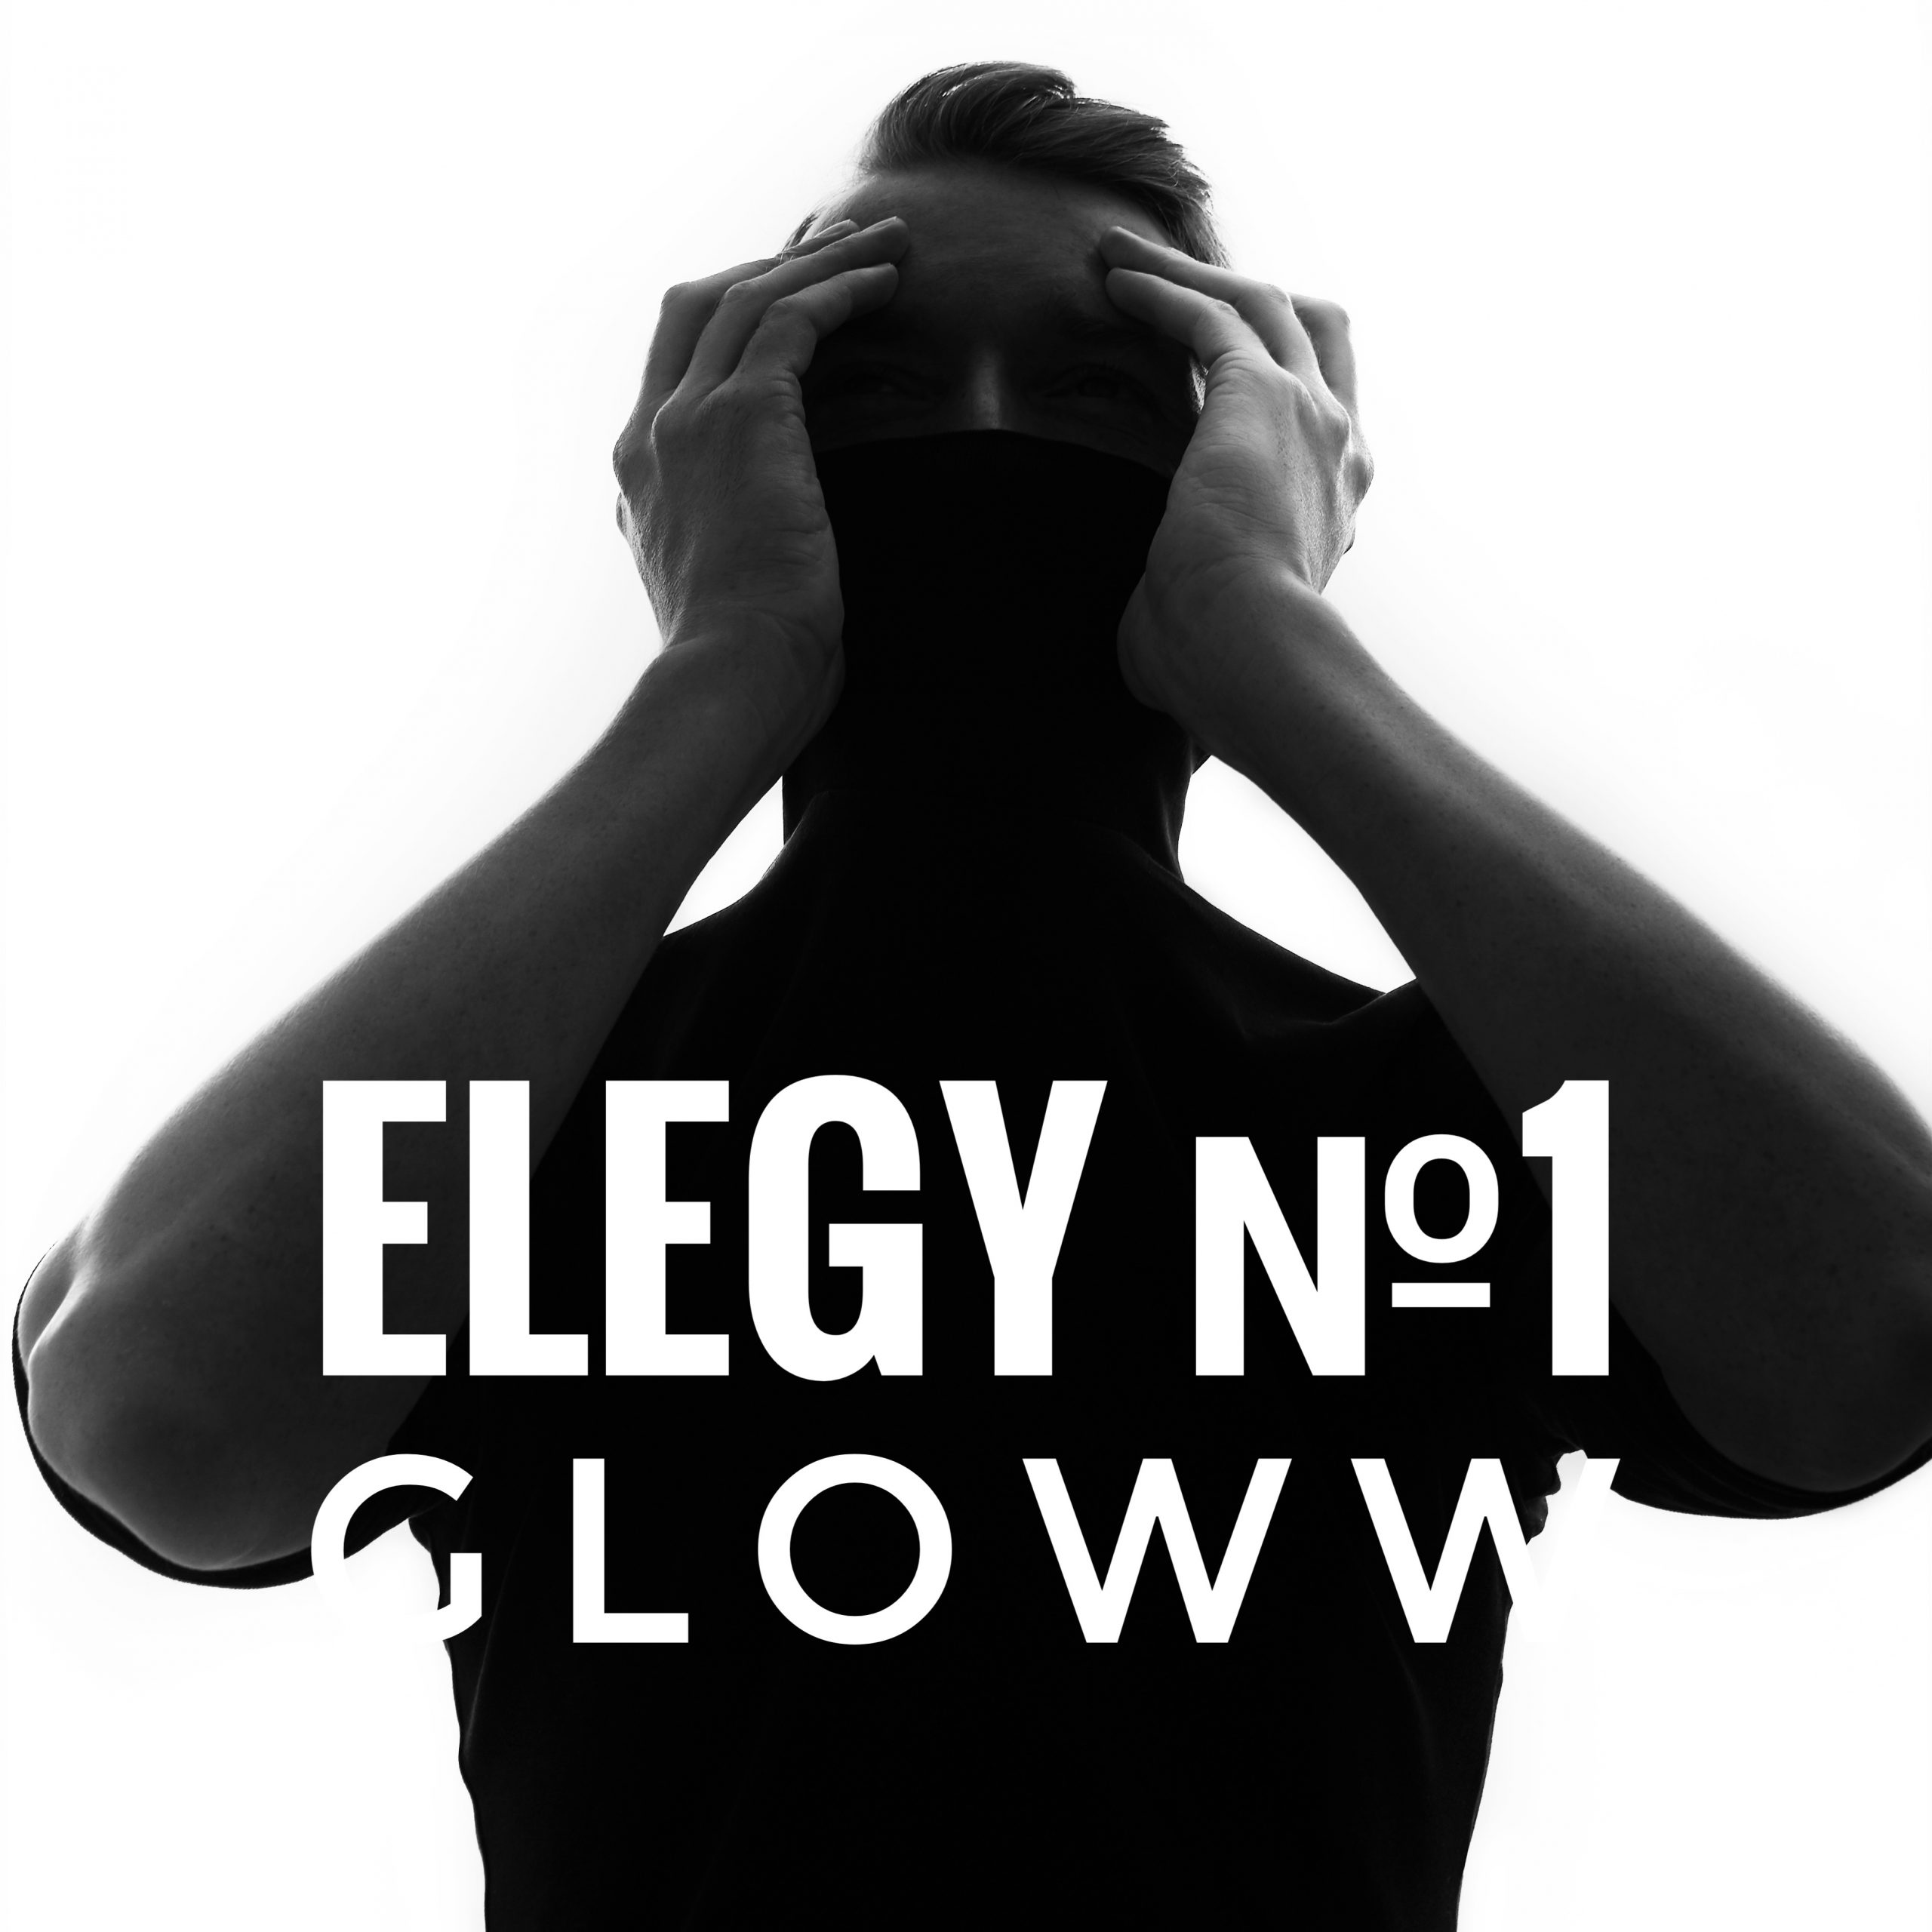 GLOWW’s epic story gets told in music and lyrical expression on new single ‘Elegy №1’.